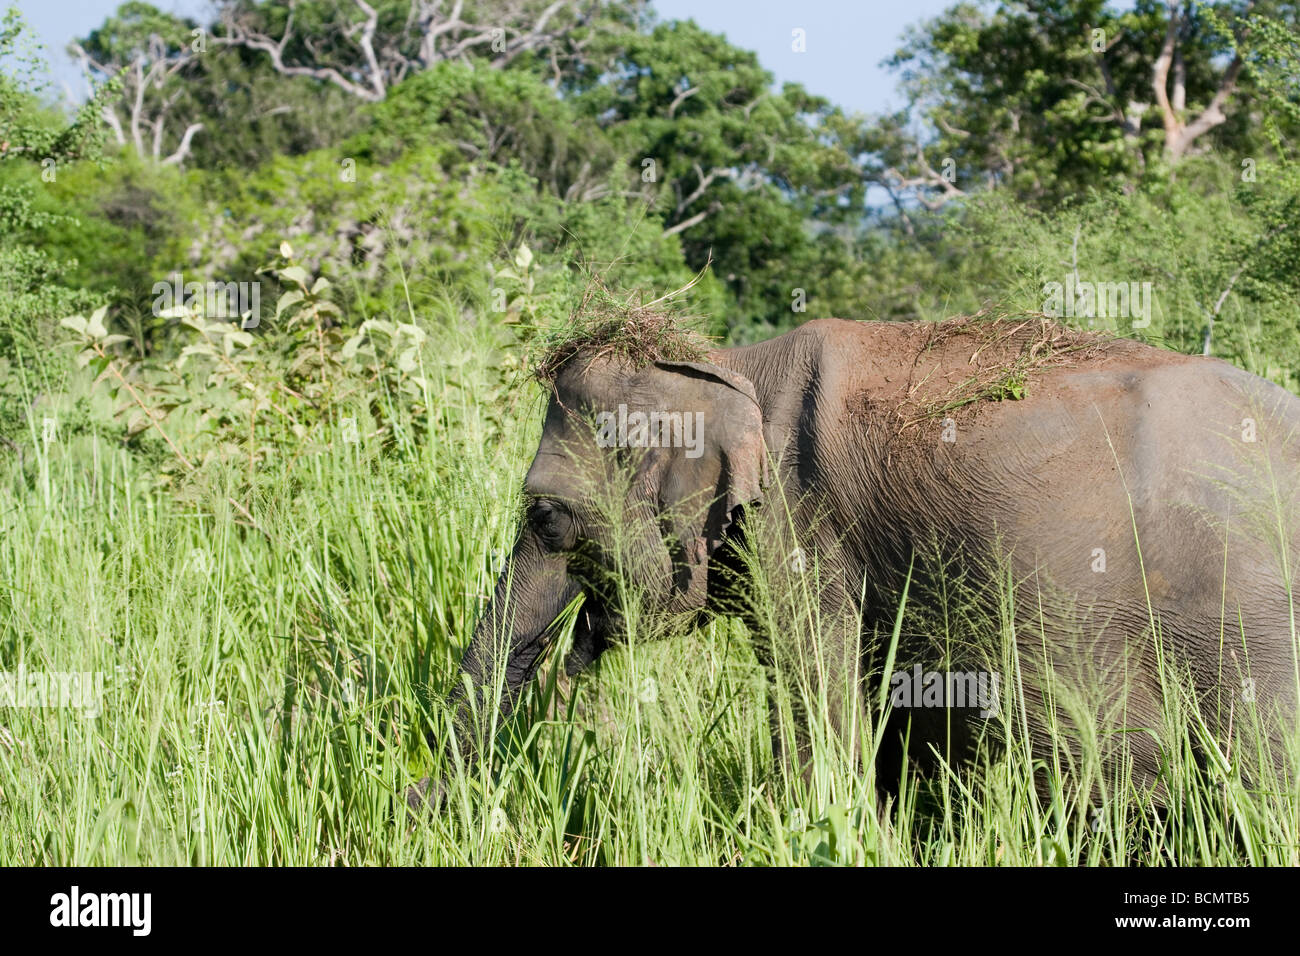 An elephant tosses dried grass onto its head to shade itself from the sun at the Uda Walawe NP, Sri Lanka Stock Photo